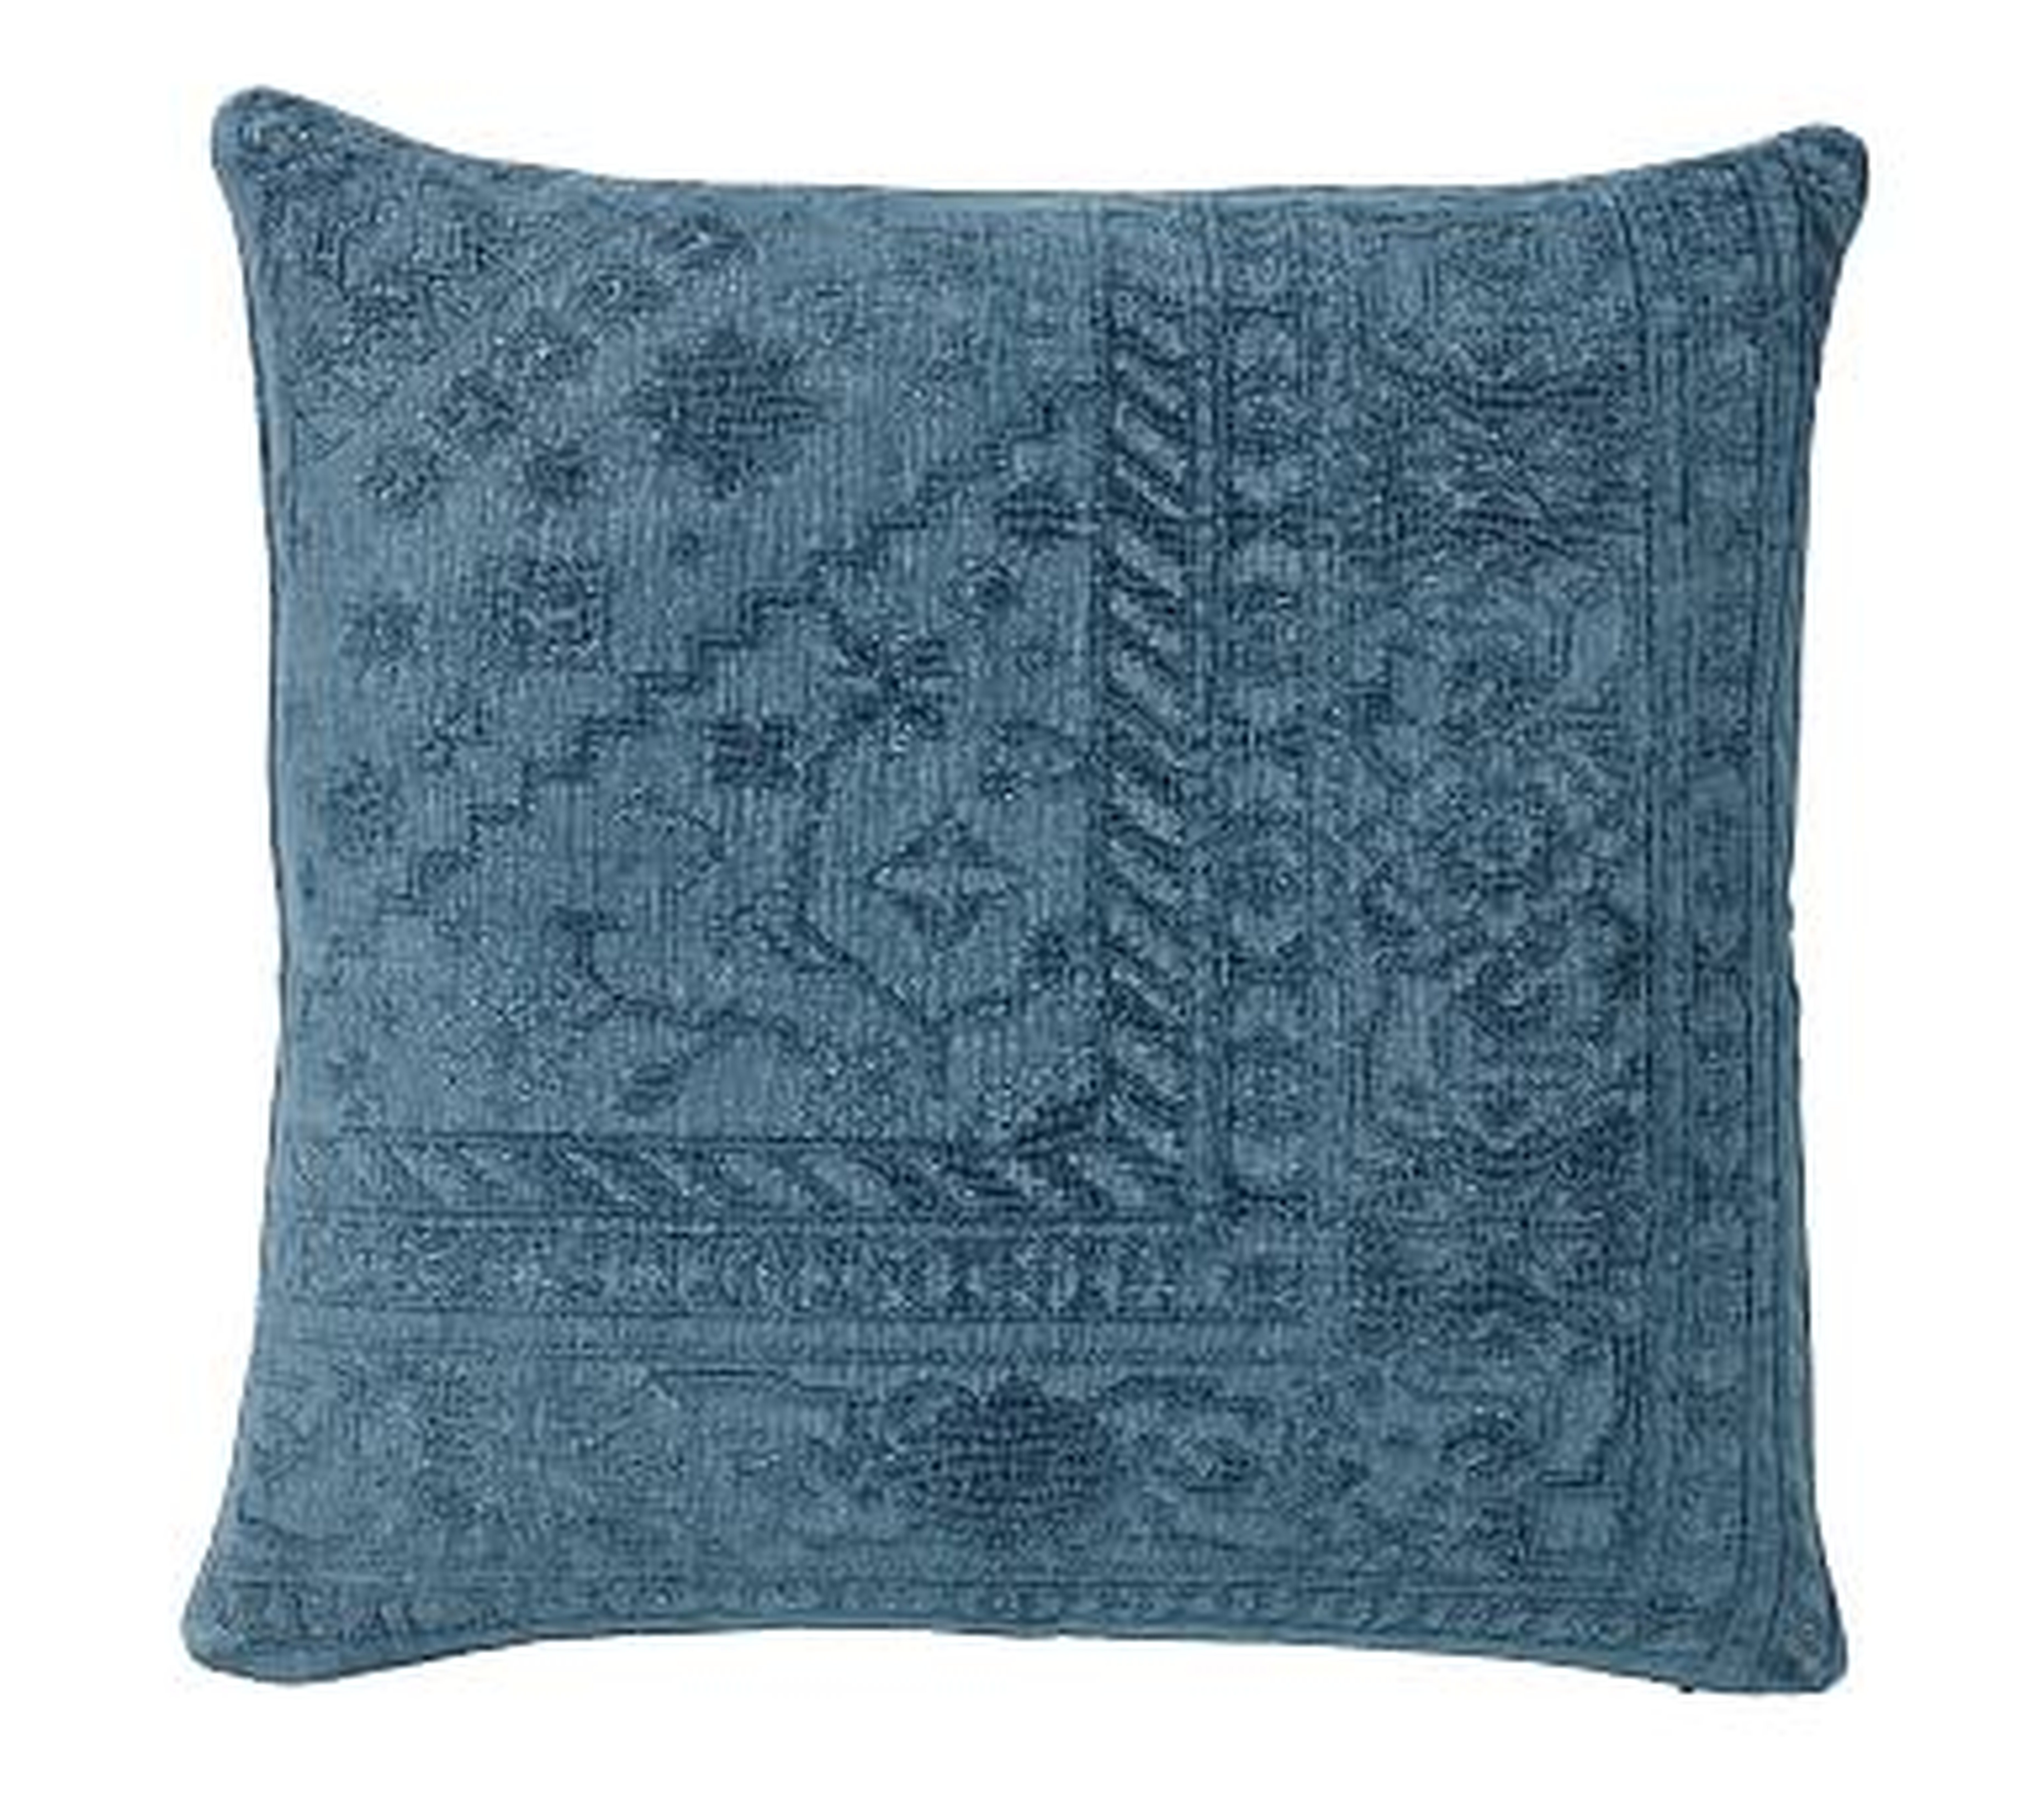 Romilly Embroidered Pillow Cover, 22", Denim Blue - Pottery Barn